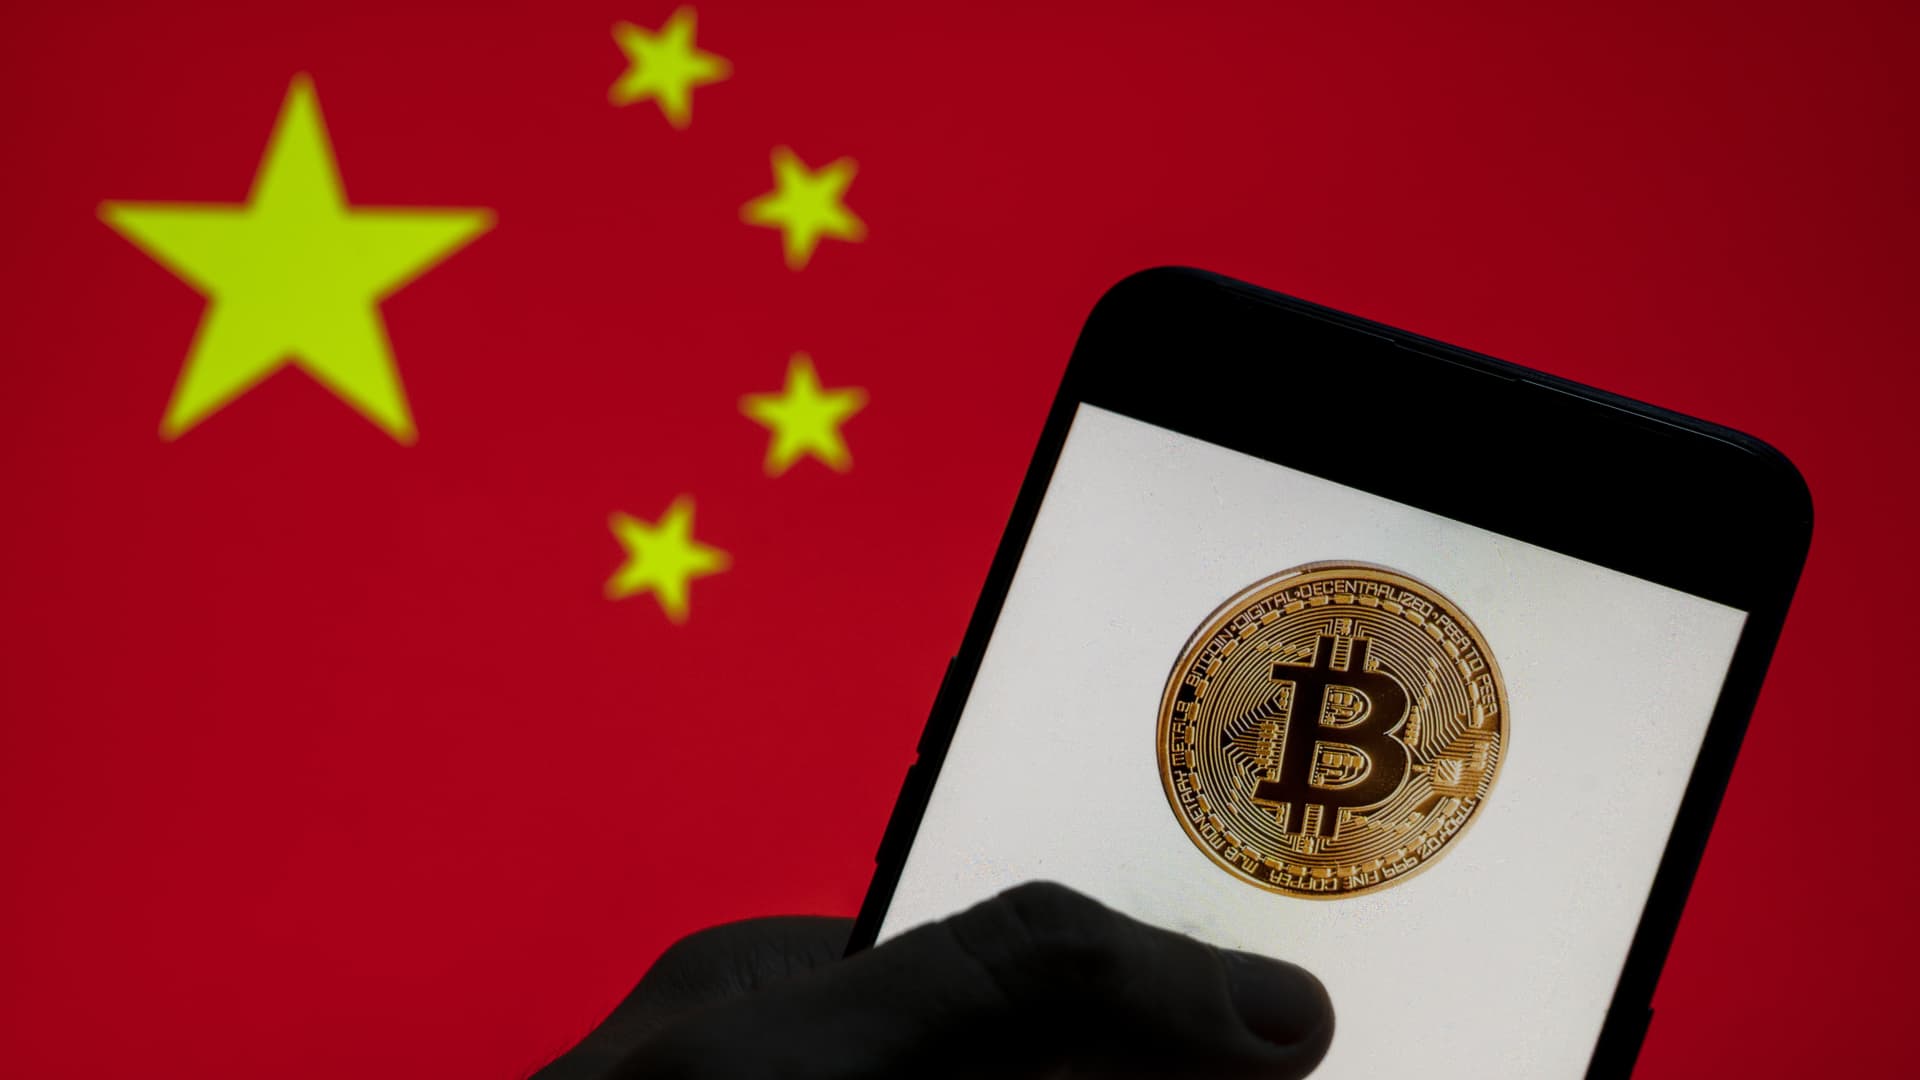 China's central bank says all cryptocurrency-related activities are illegal, vows harsh crackdown